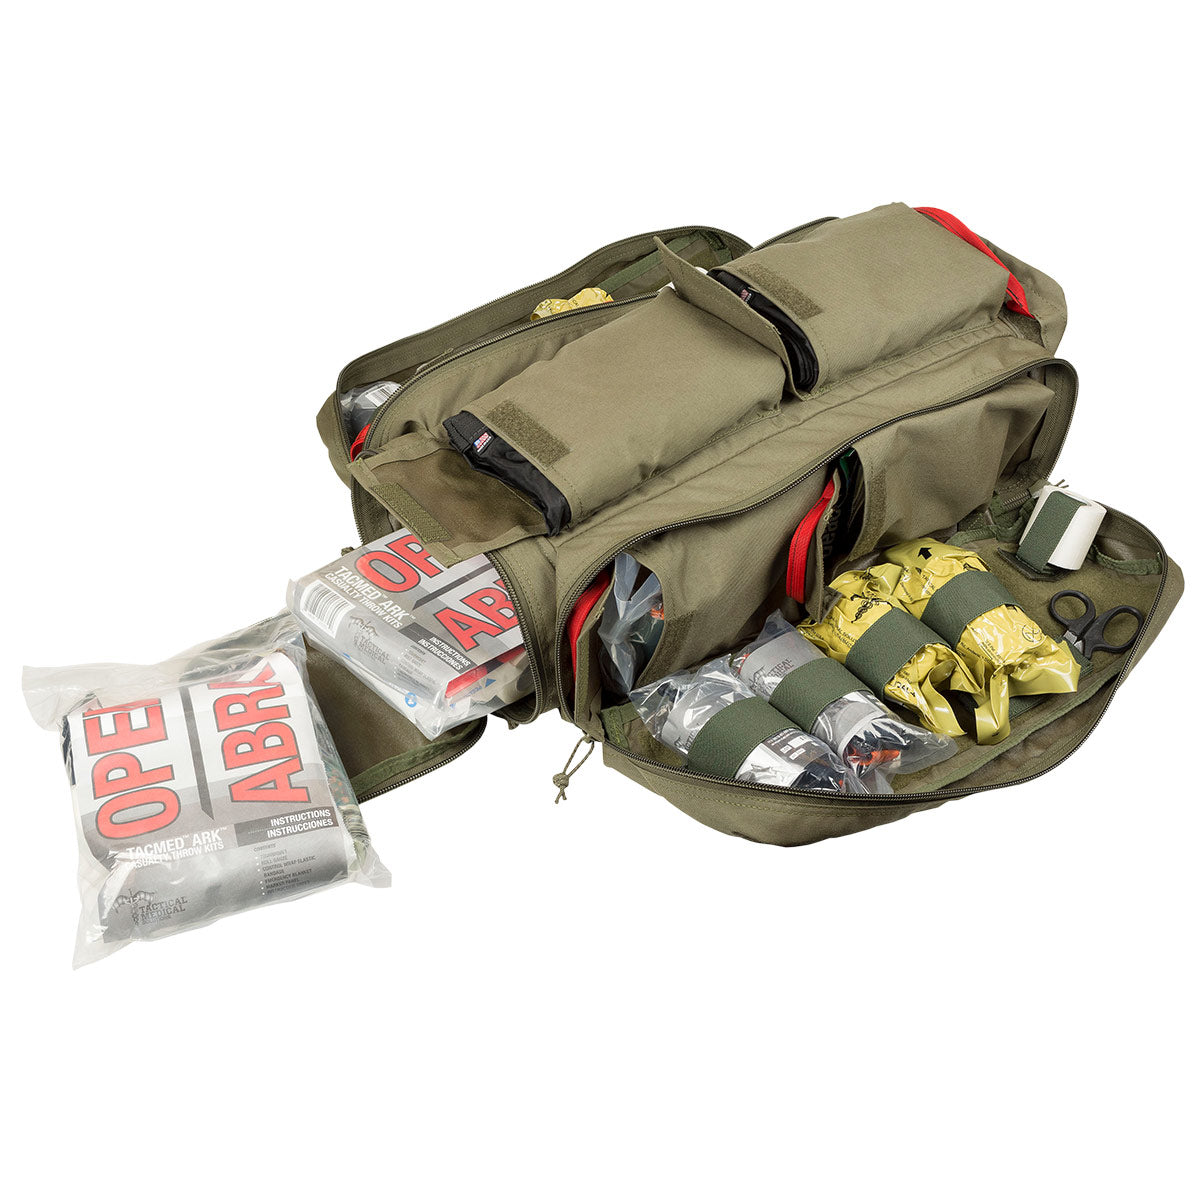 TacMed™ Warm Zone/SRO ARK open kit showing contents